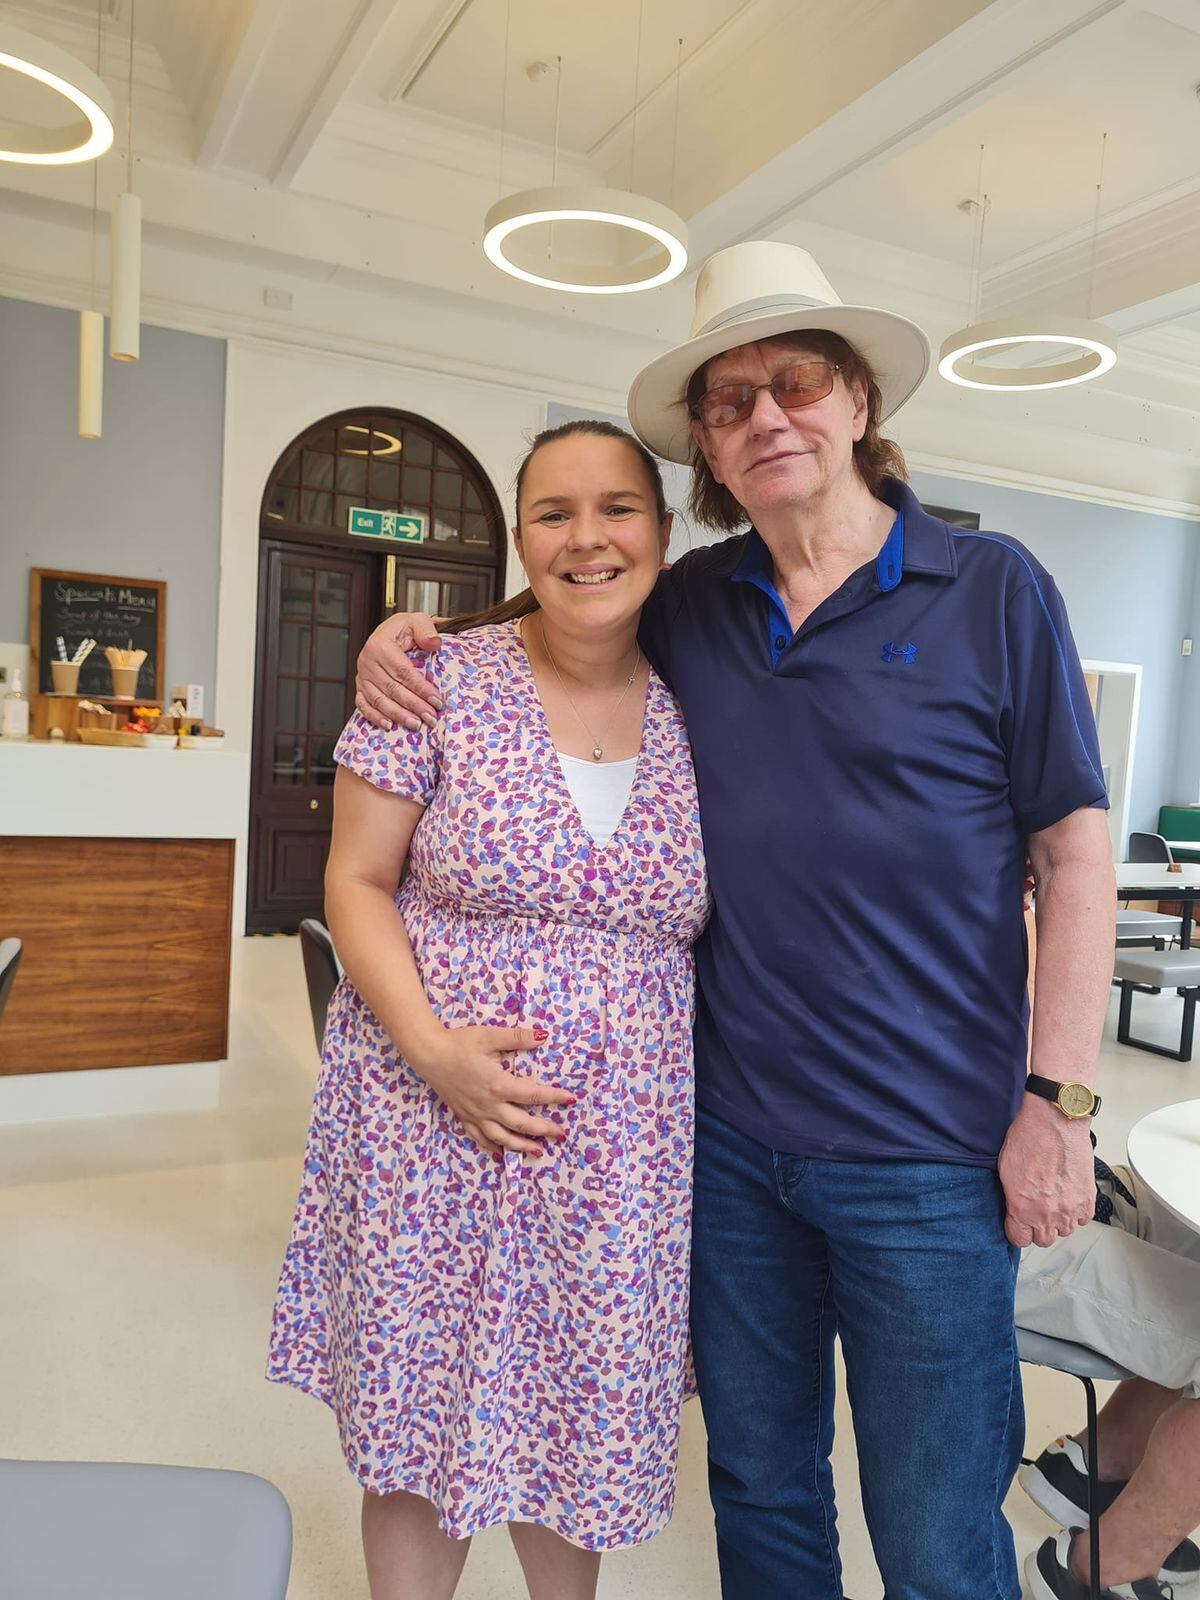 Fan Claire Handford popped into Wolverhampton Art Gallery to at the Slade exhibition and bumped into Jim Lea. Photo: Facebook/Jim Lea Music.